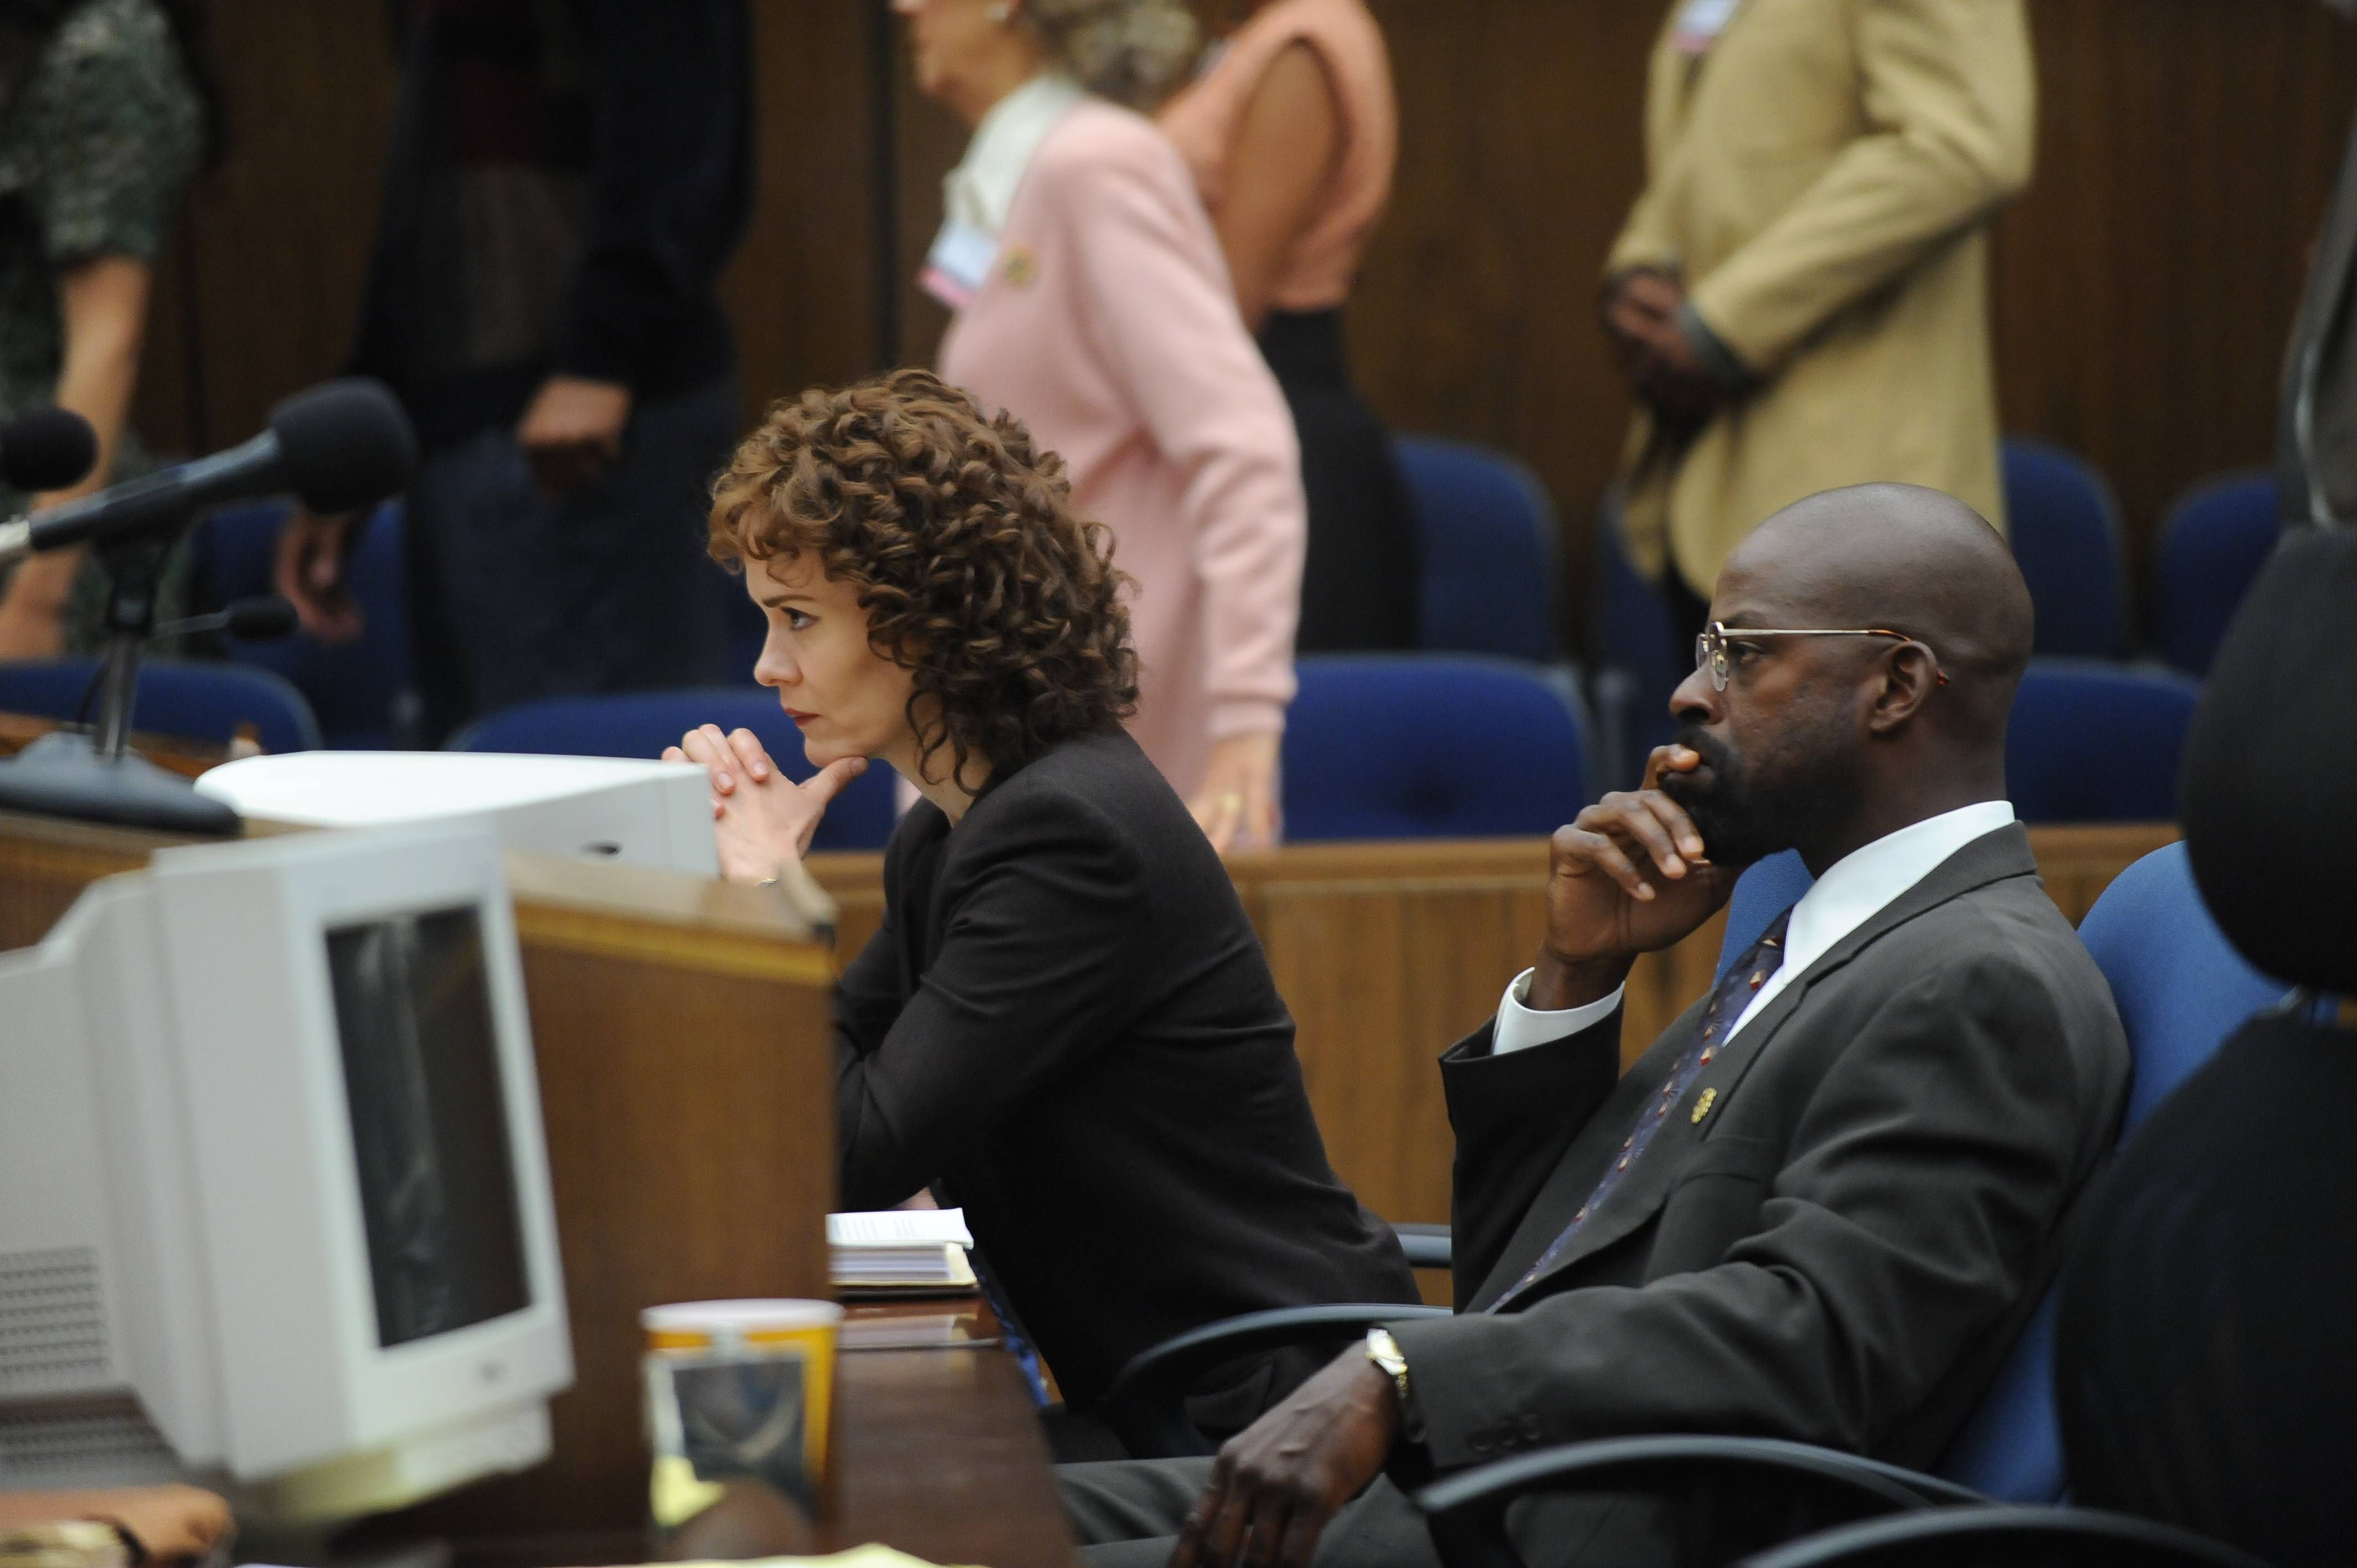 The People v. O. J. Simpson: American Crime Story (2016 